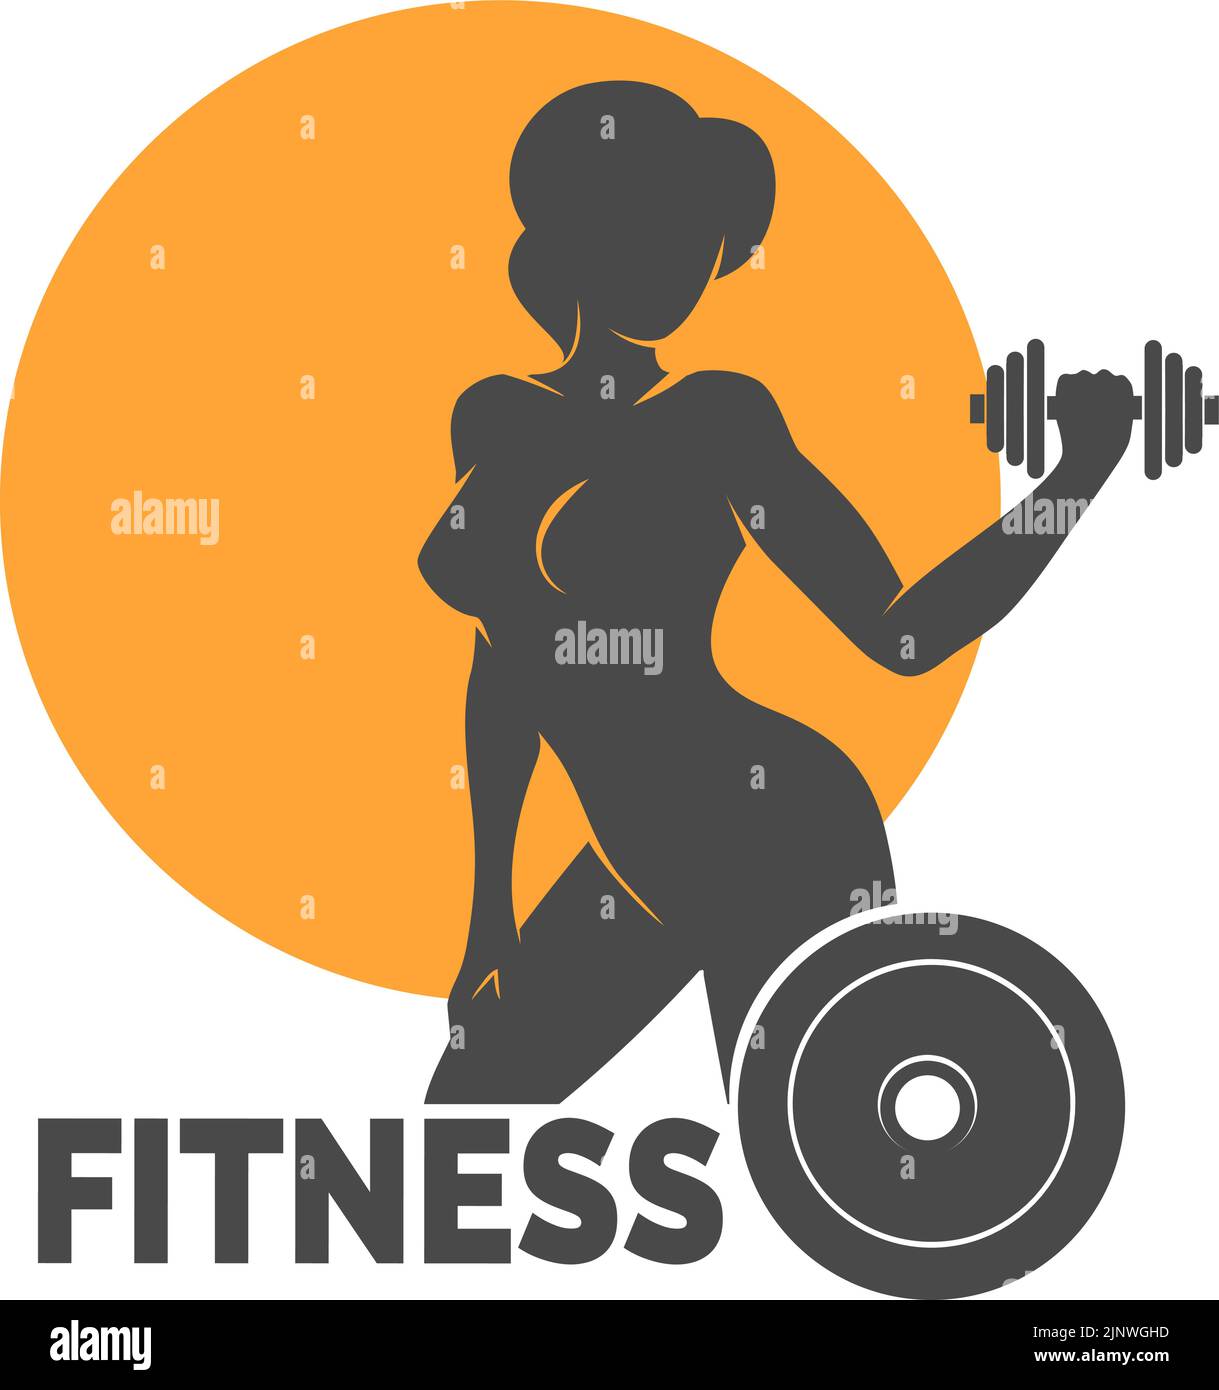 Fitness club logo or emblem . Woman holds dumbbells. Vector illustration Isolated on white background. Stock Vector